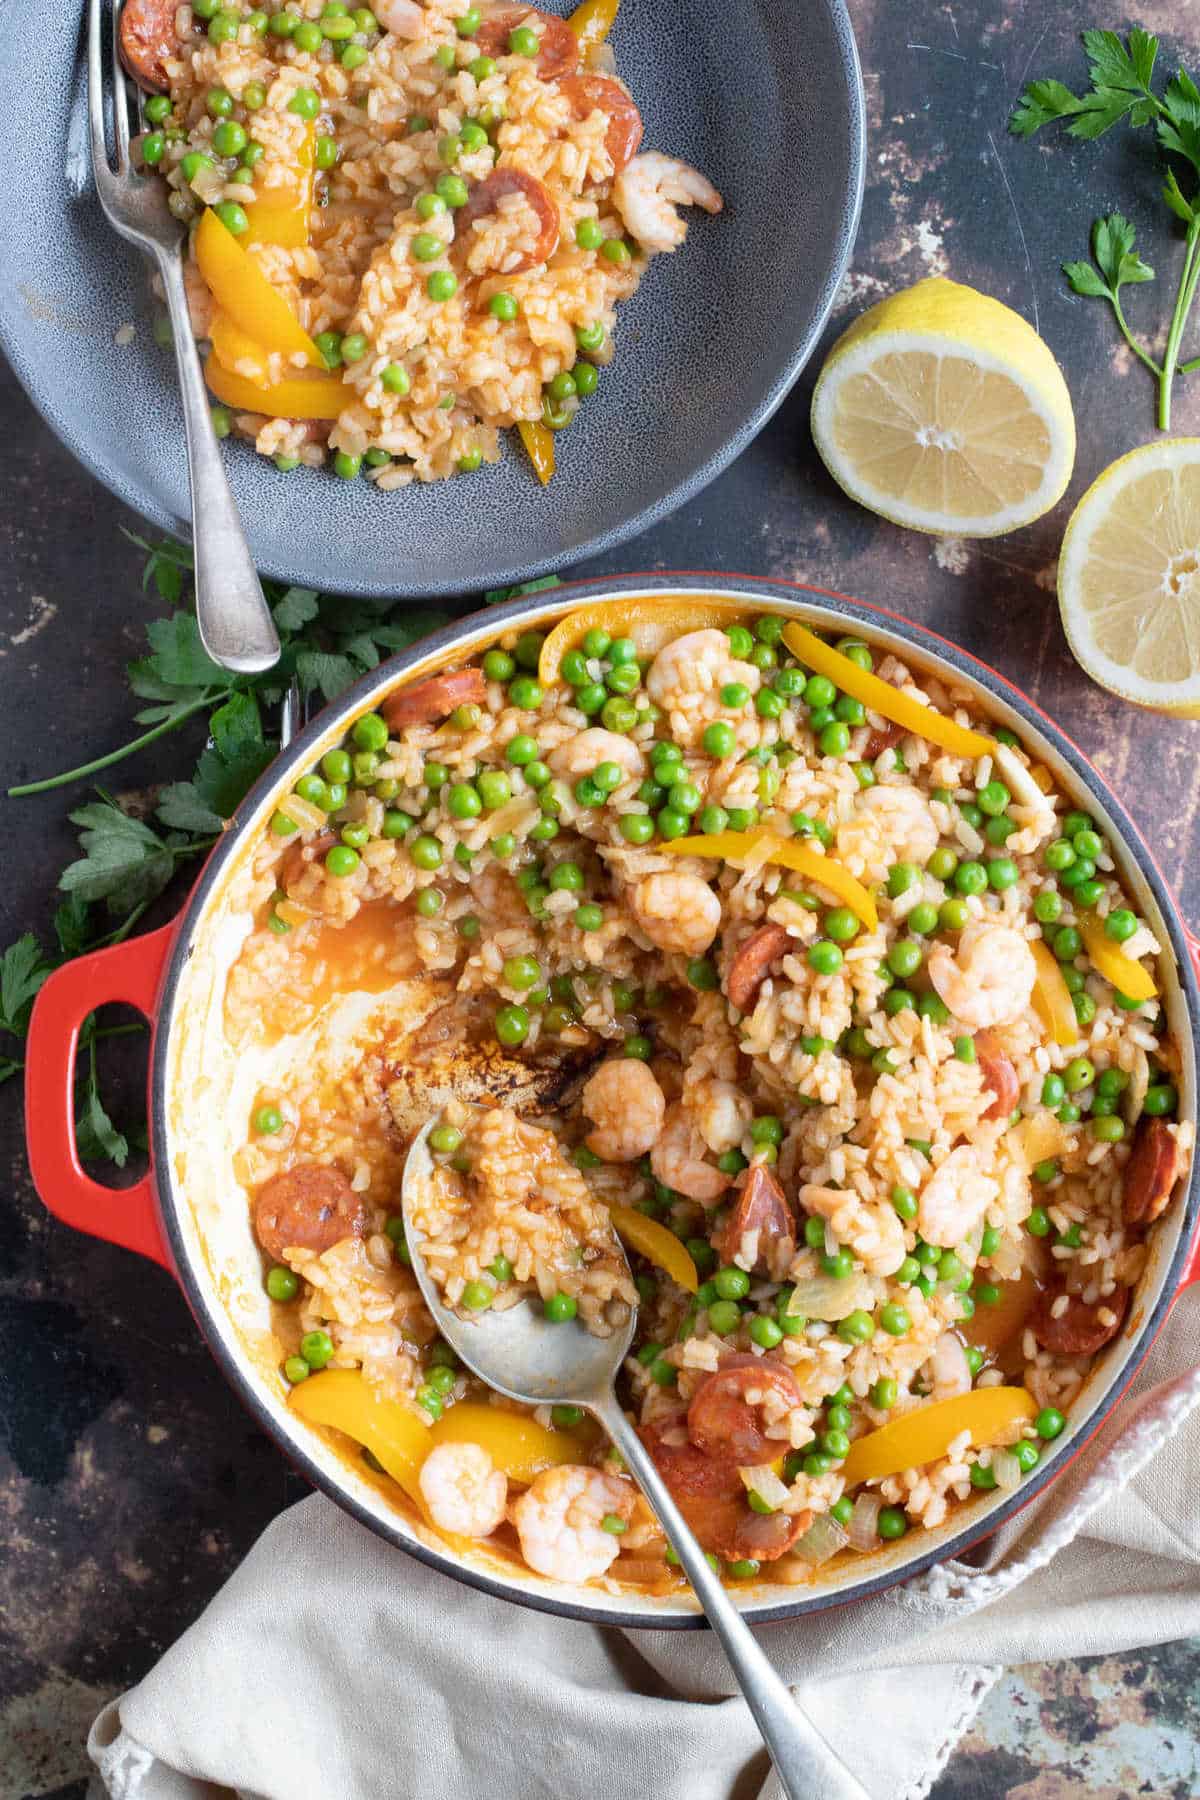 Prawn and chorizo paella in a red shallow casserole, with lemon wedges.